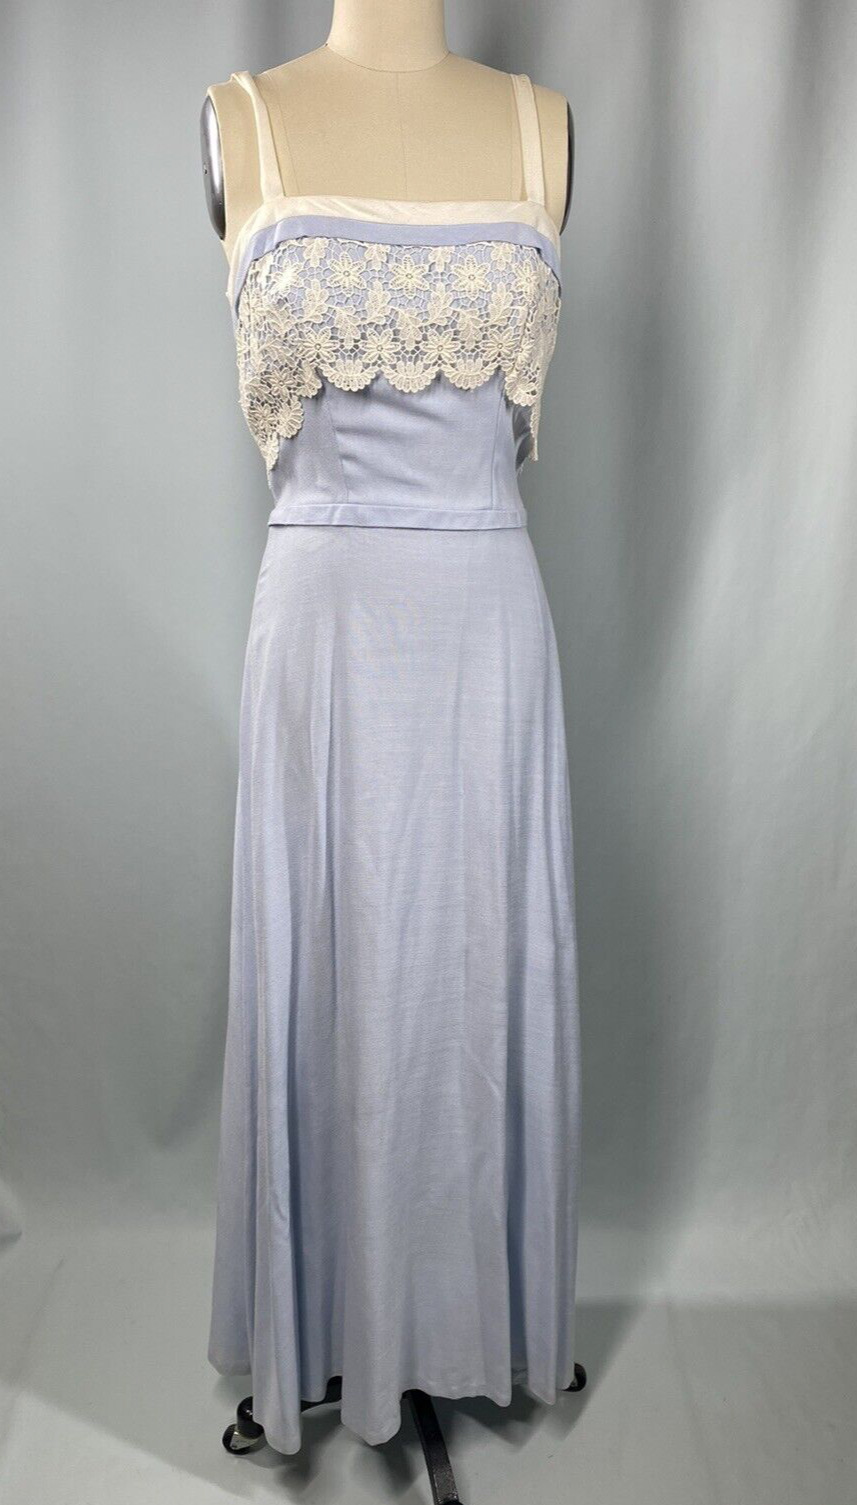 Vintage Nightgown SIZE SMALL blue linen long maxi SYLVIA ANN 60s 70s lace